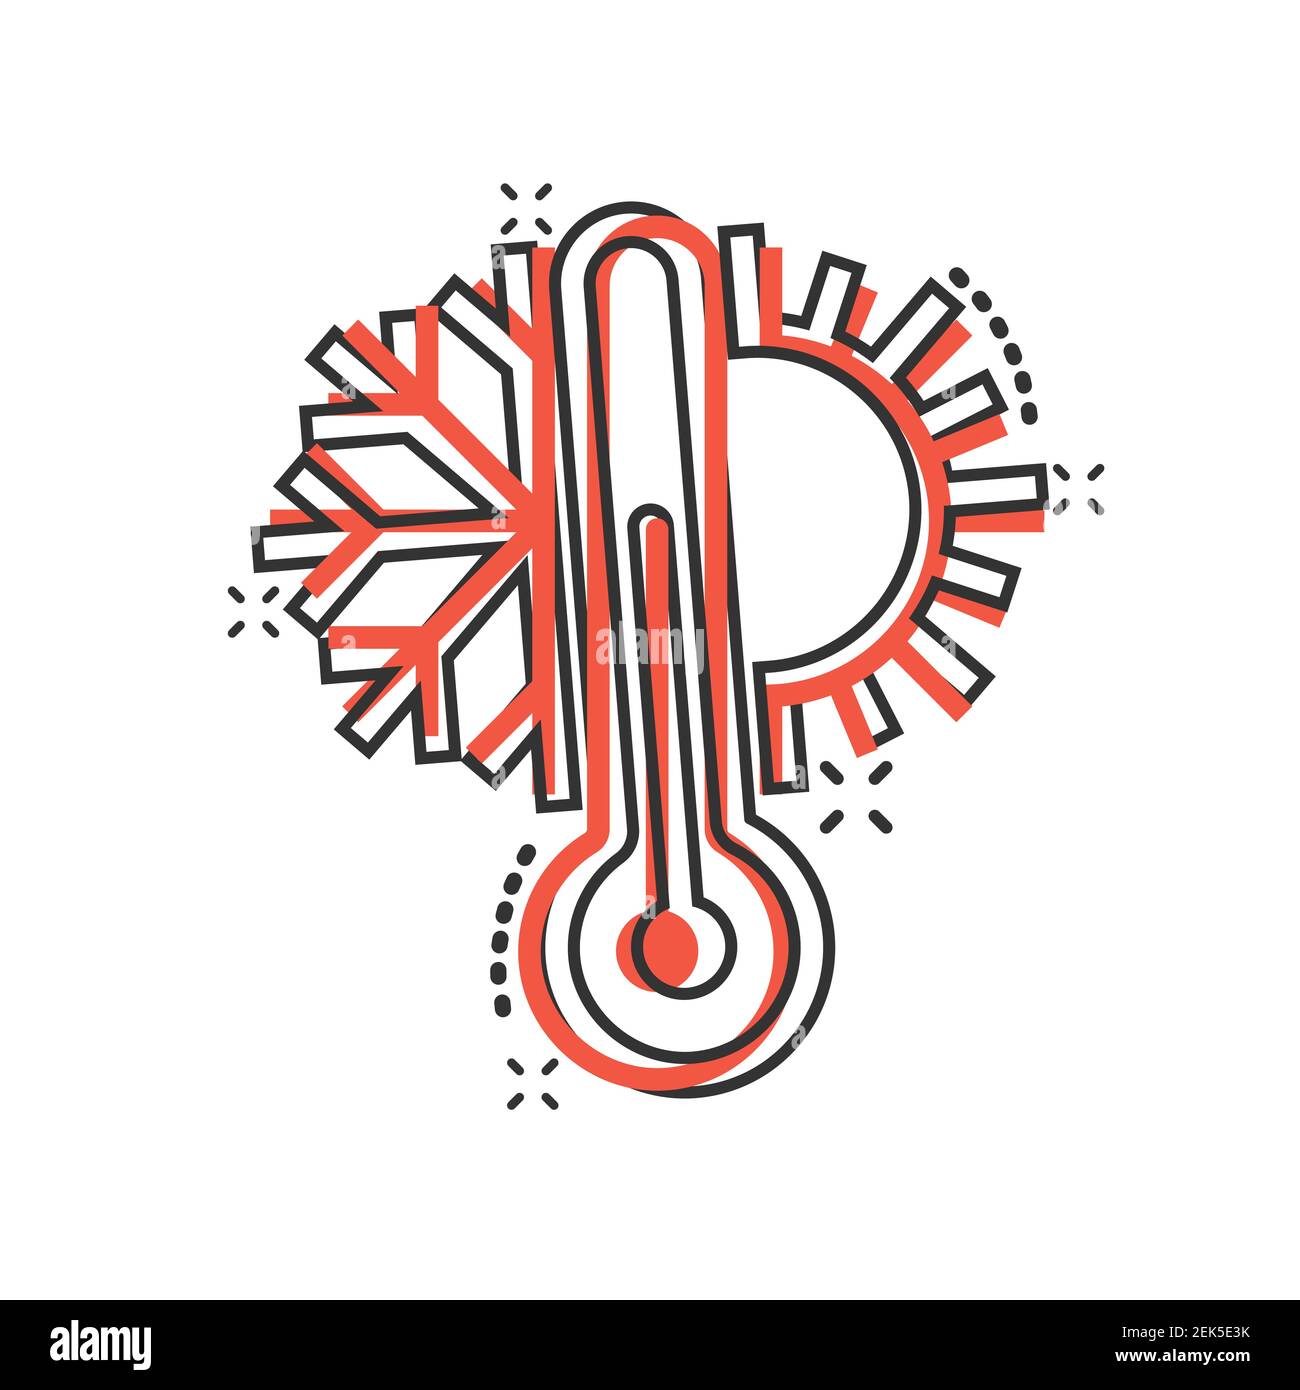 Thermometer climate control icon in comic style. Meteorology balance cartoon vector illustration on white isolated background. Hot, cold temperature s Stock Vector